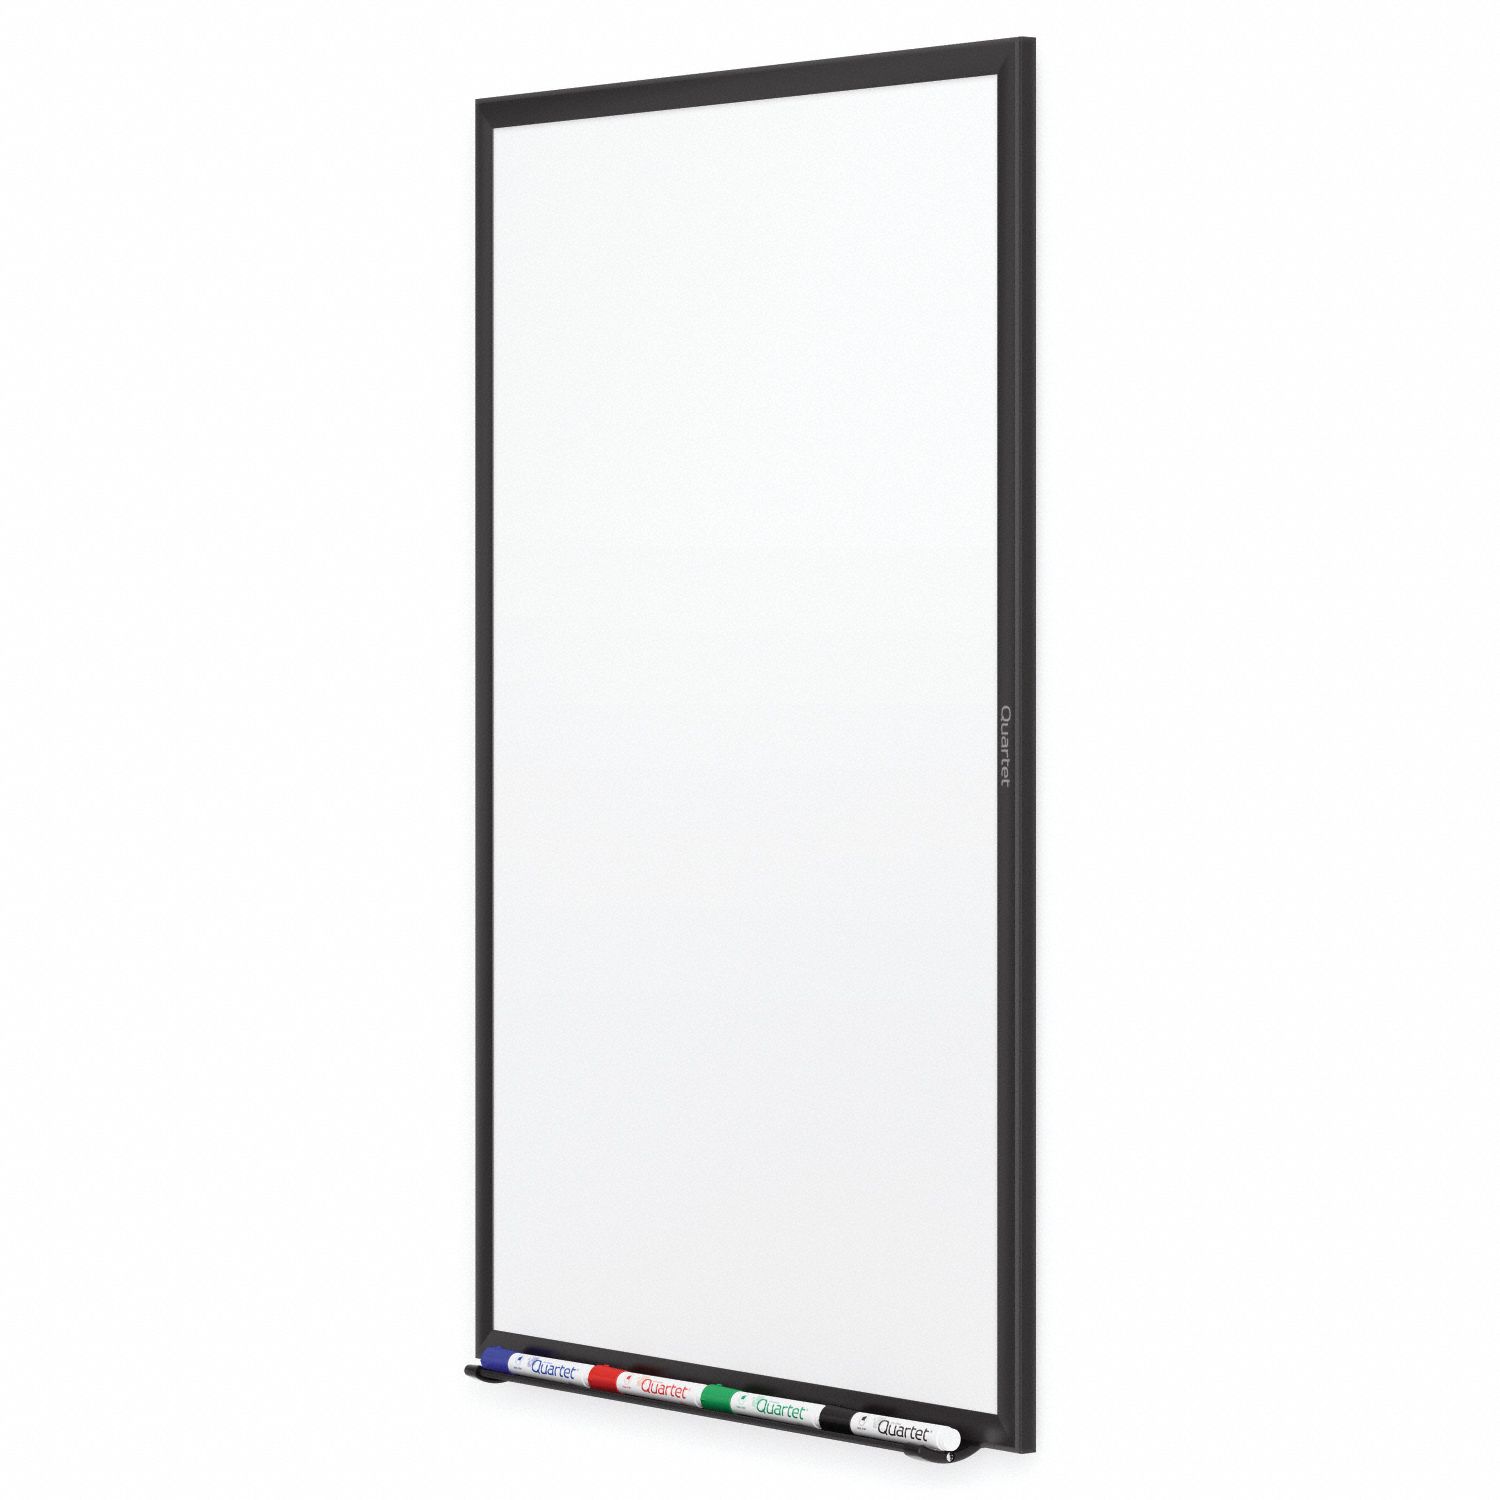 Quartet Dry Erase Board Wall Mounted 36 In Dry Erase Ht 48 In Dry Erase Wd 1 2 In Dp Black